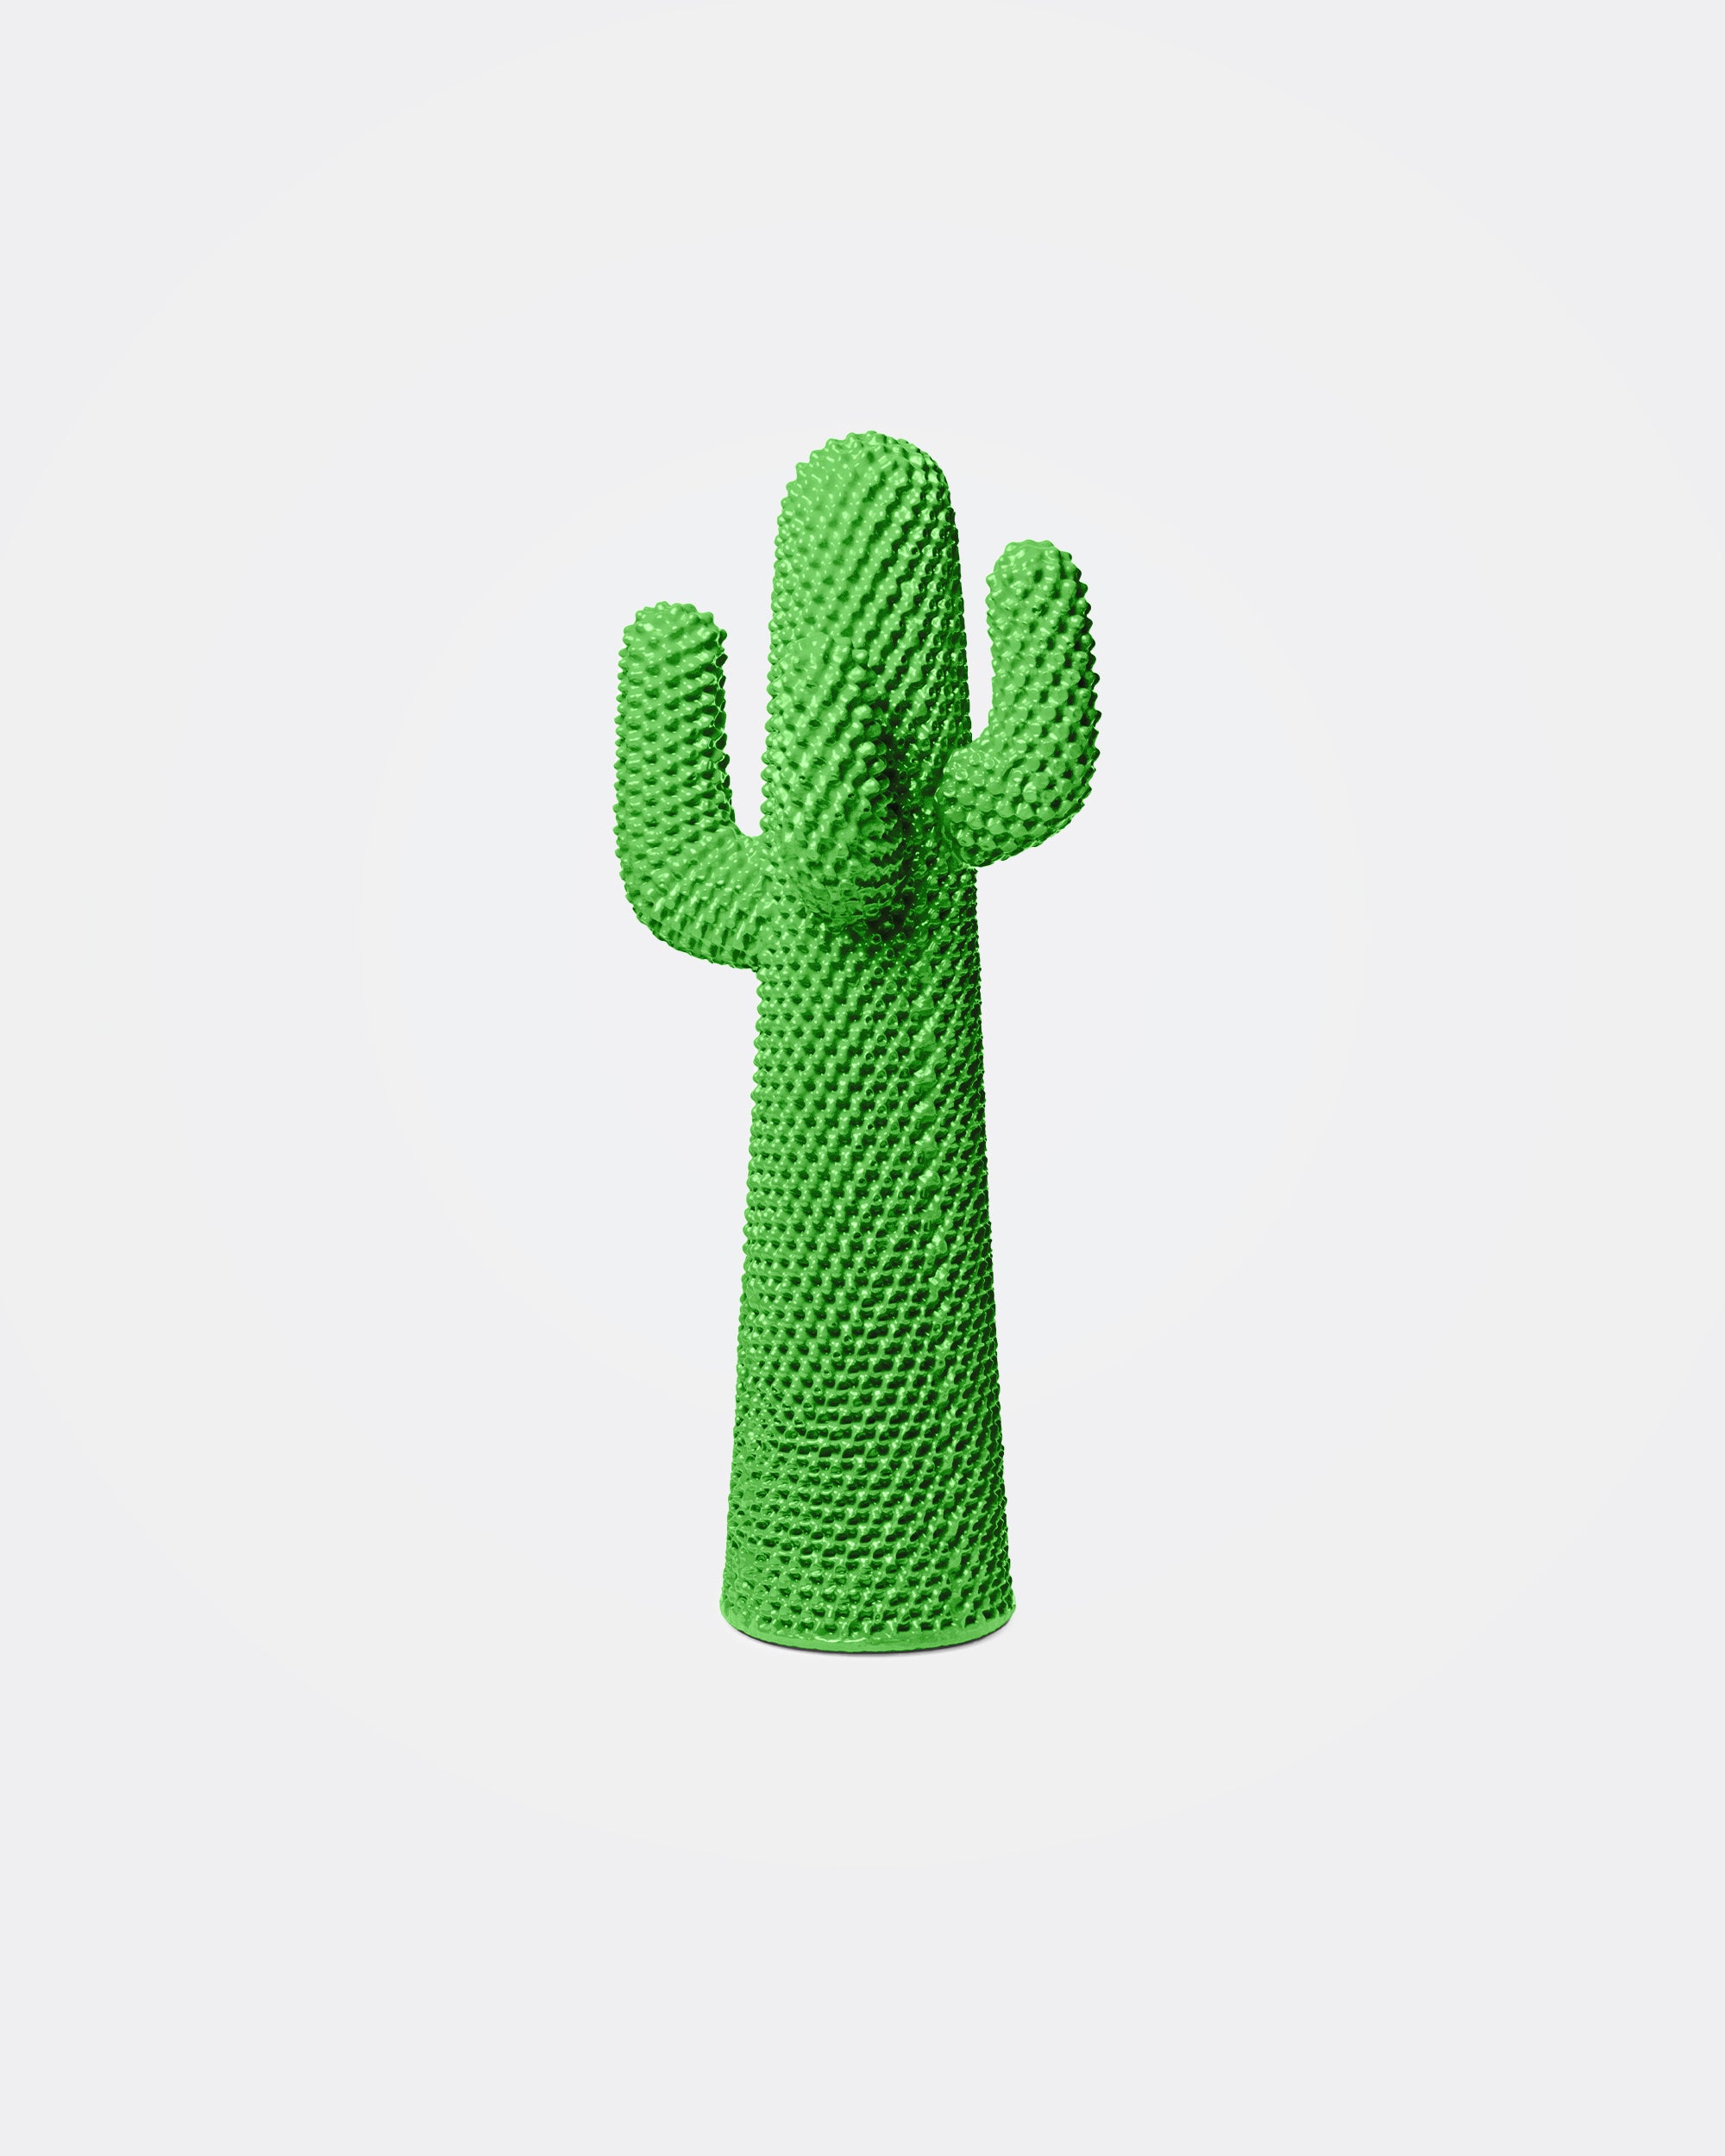 Another Green Cactus